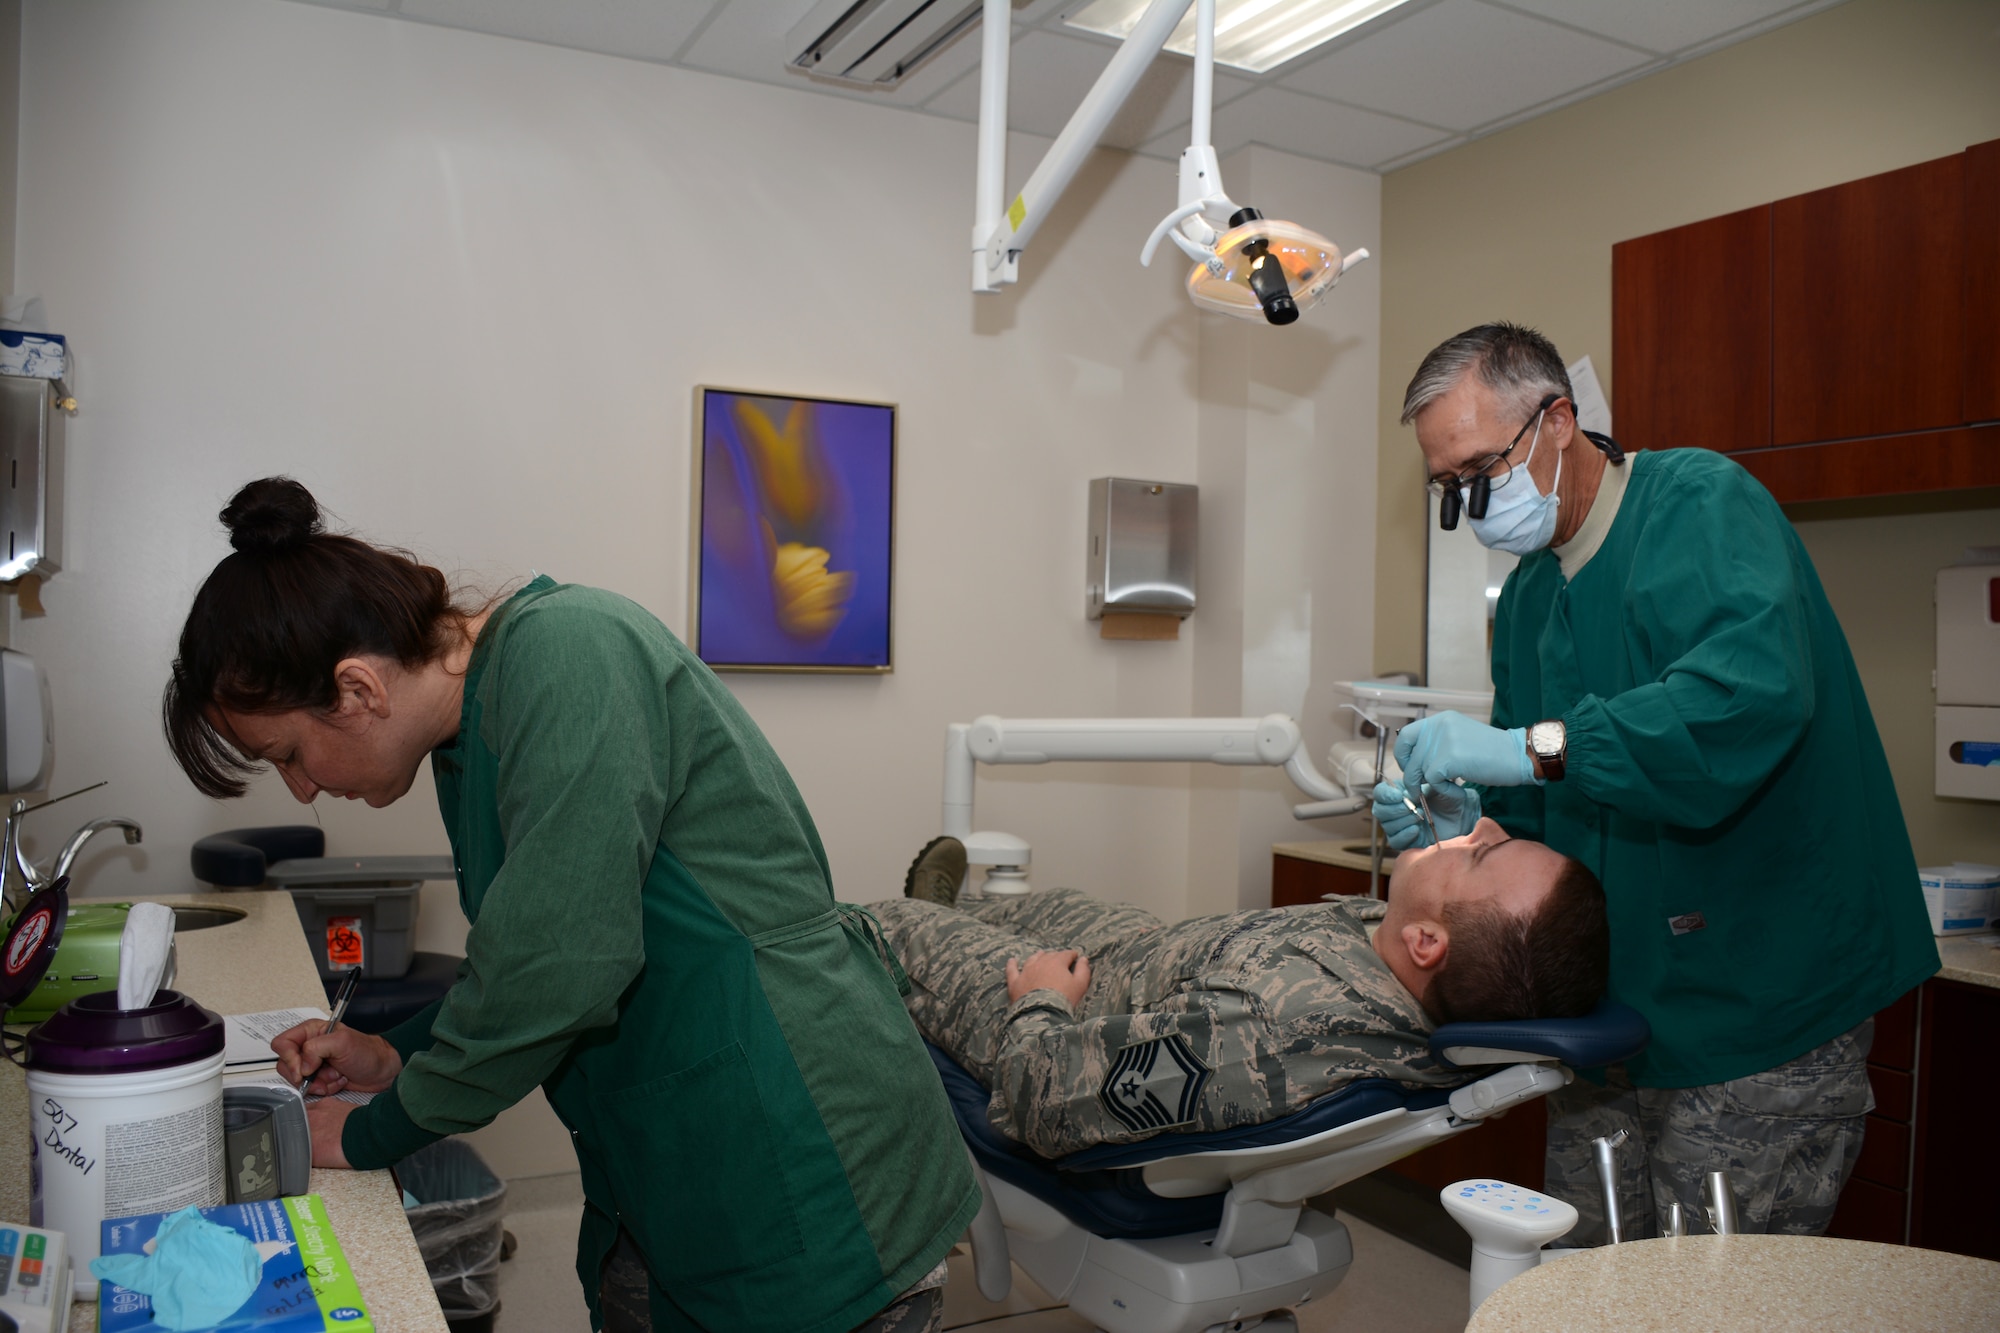 Master Sgt. Melissa Long, Dental Hygienist in the 507th Medical Squadron, annotates
the patient's dental record while assisting Lt. Col. (Dr.) Randall Griffin
during an annual exam on Oct. 4  2014 at Tinker Air Force Base.  On a
typical UTA weekend, the dental team examines approximately 50 patients.  (U.S. Air Force photo/Staff Sgt. Lauren Gleason)
